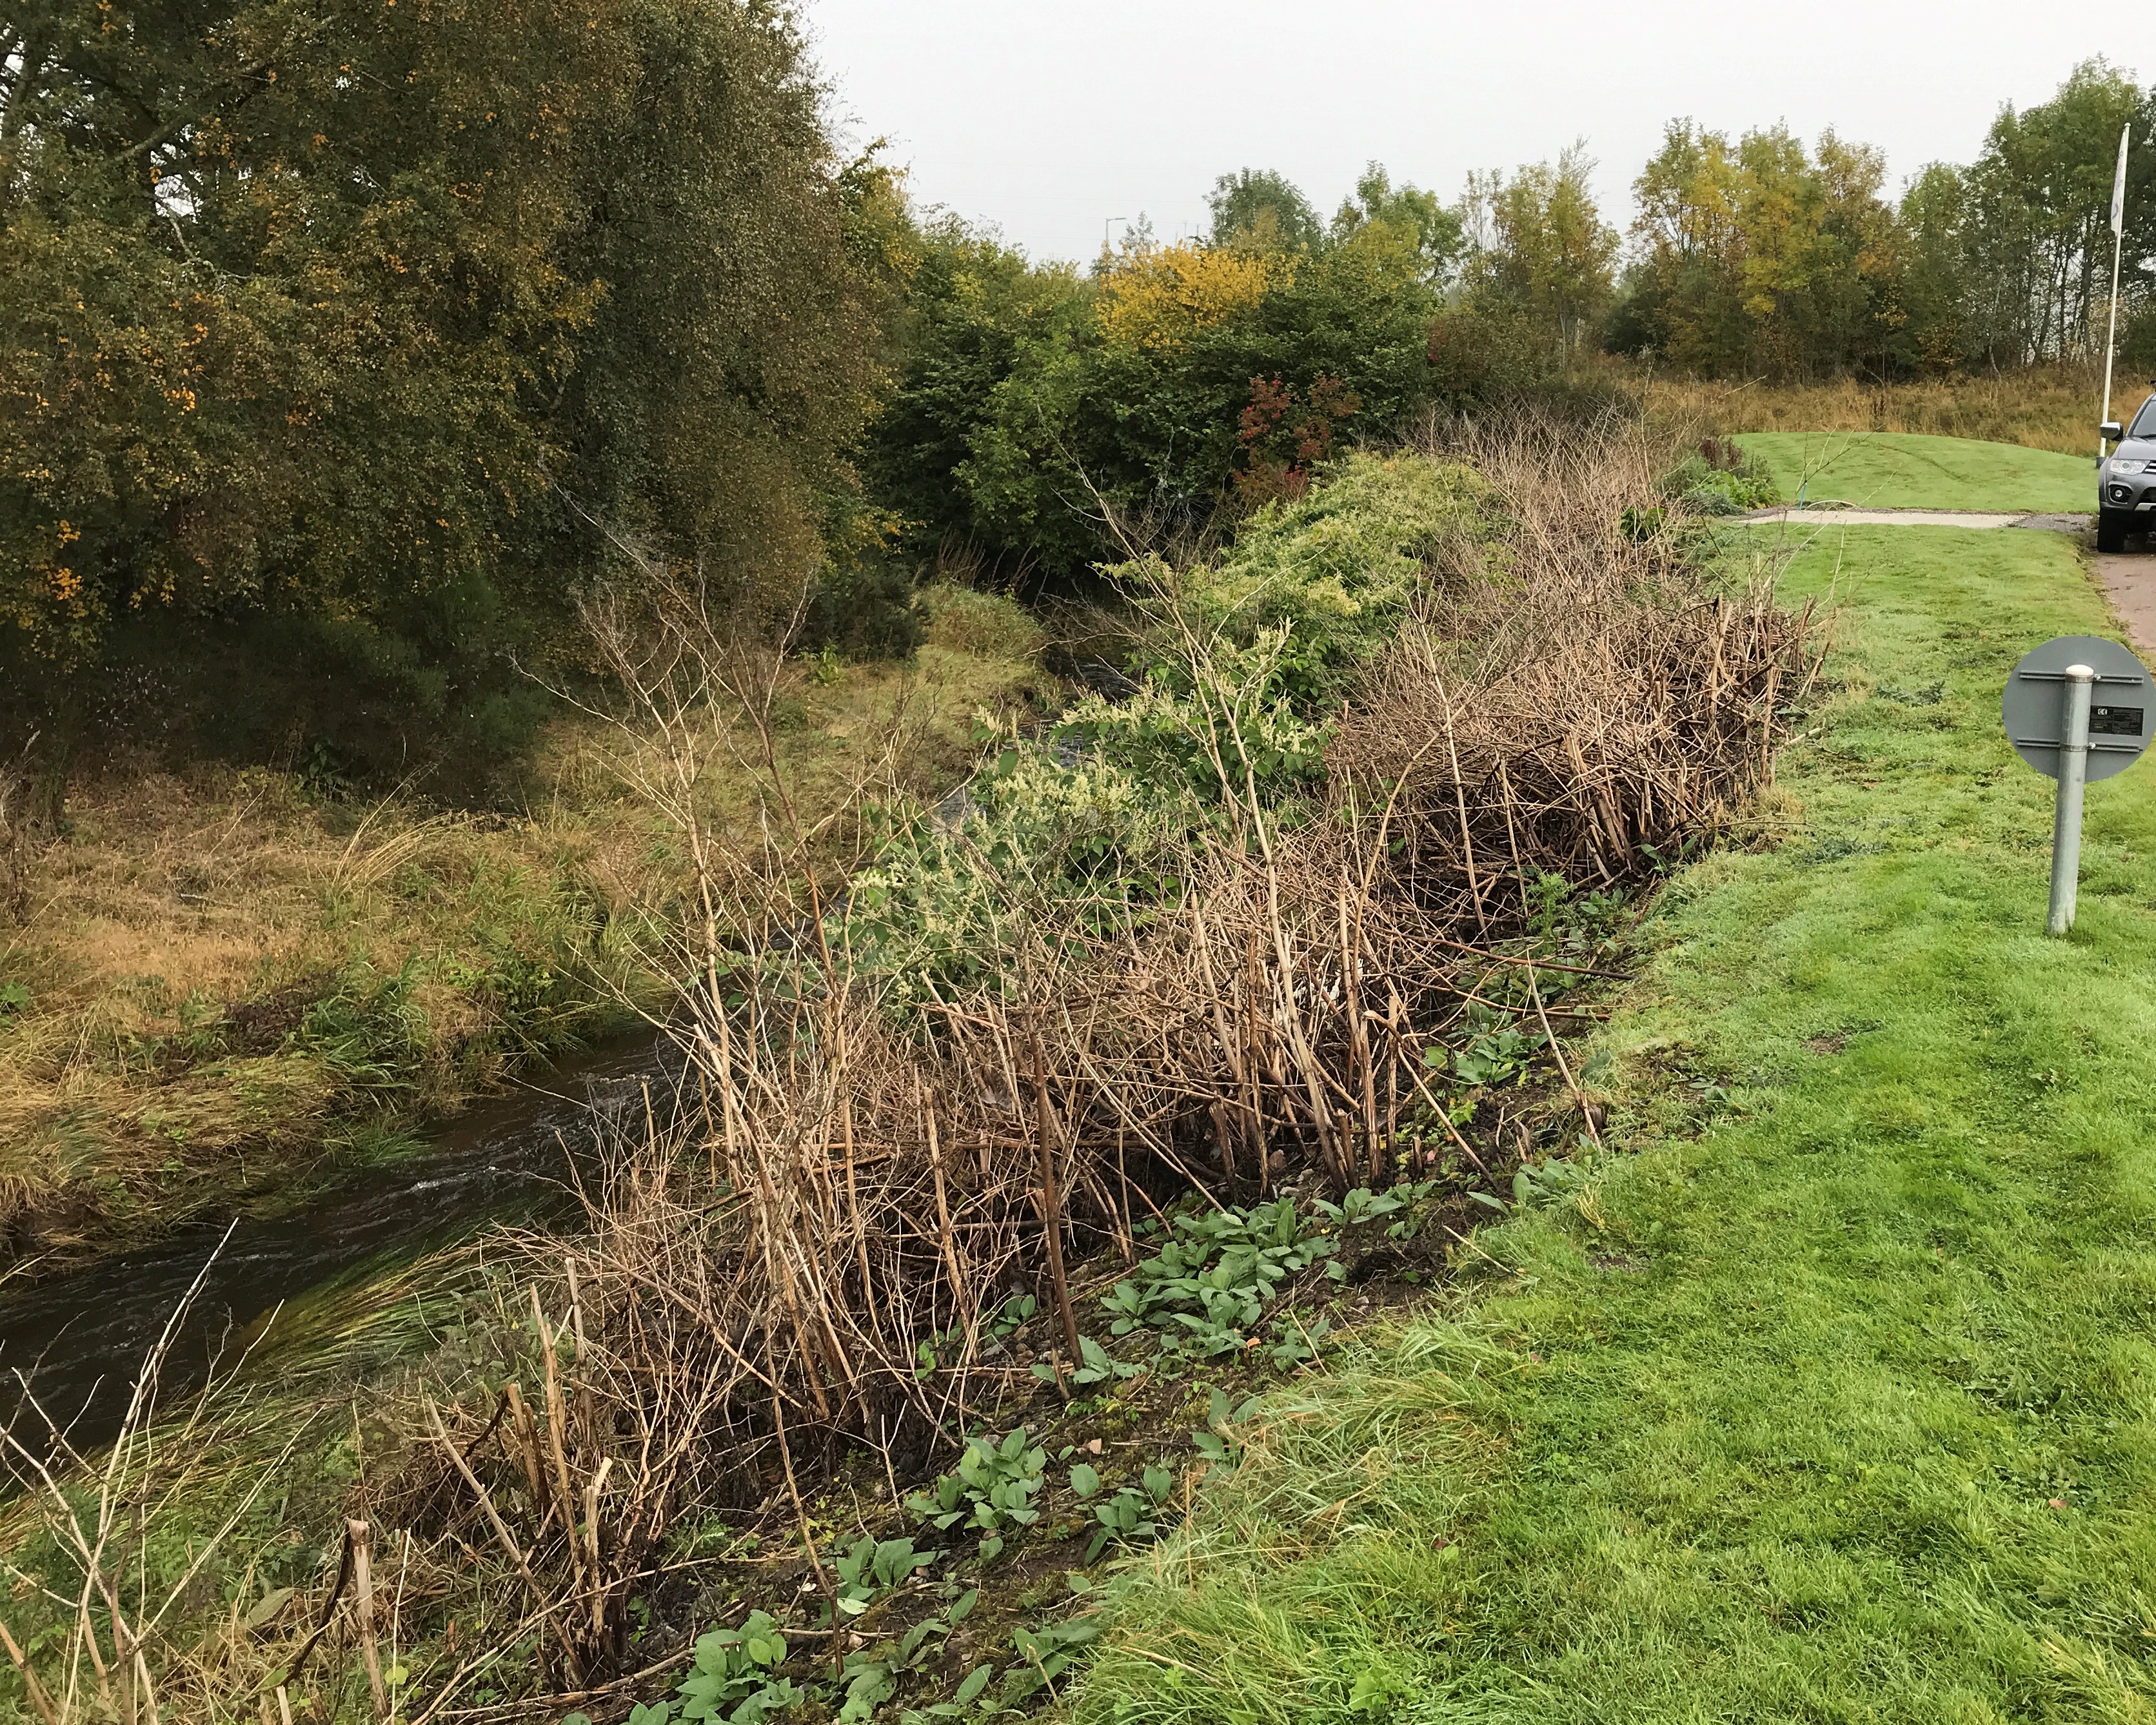 Japanese knotweed on the Sheriff burn in 2020 - before treatment